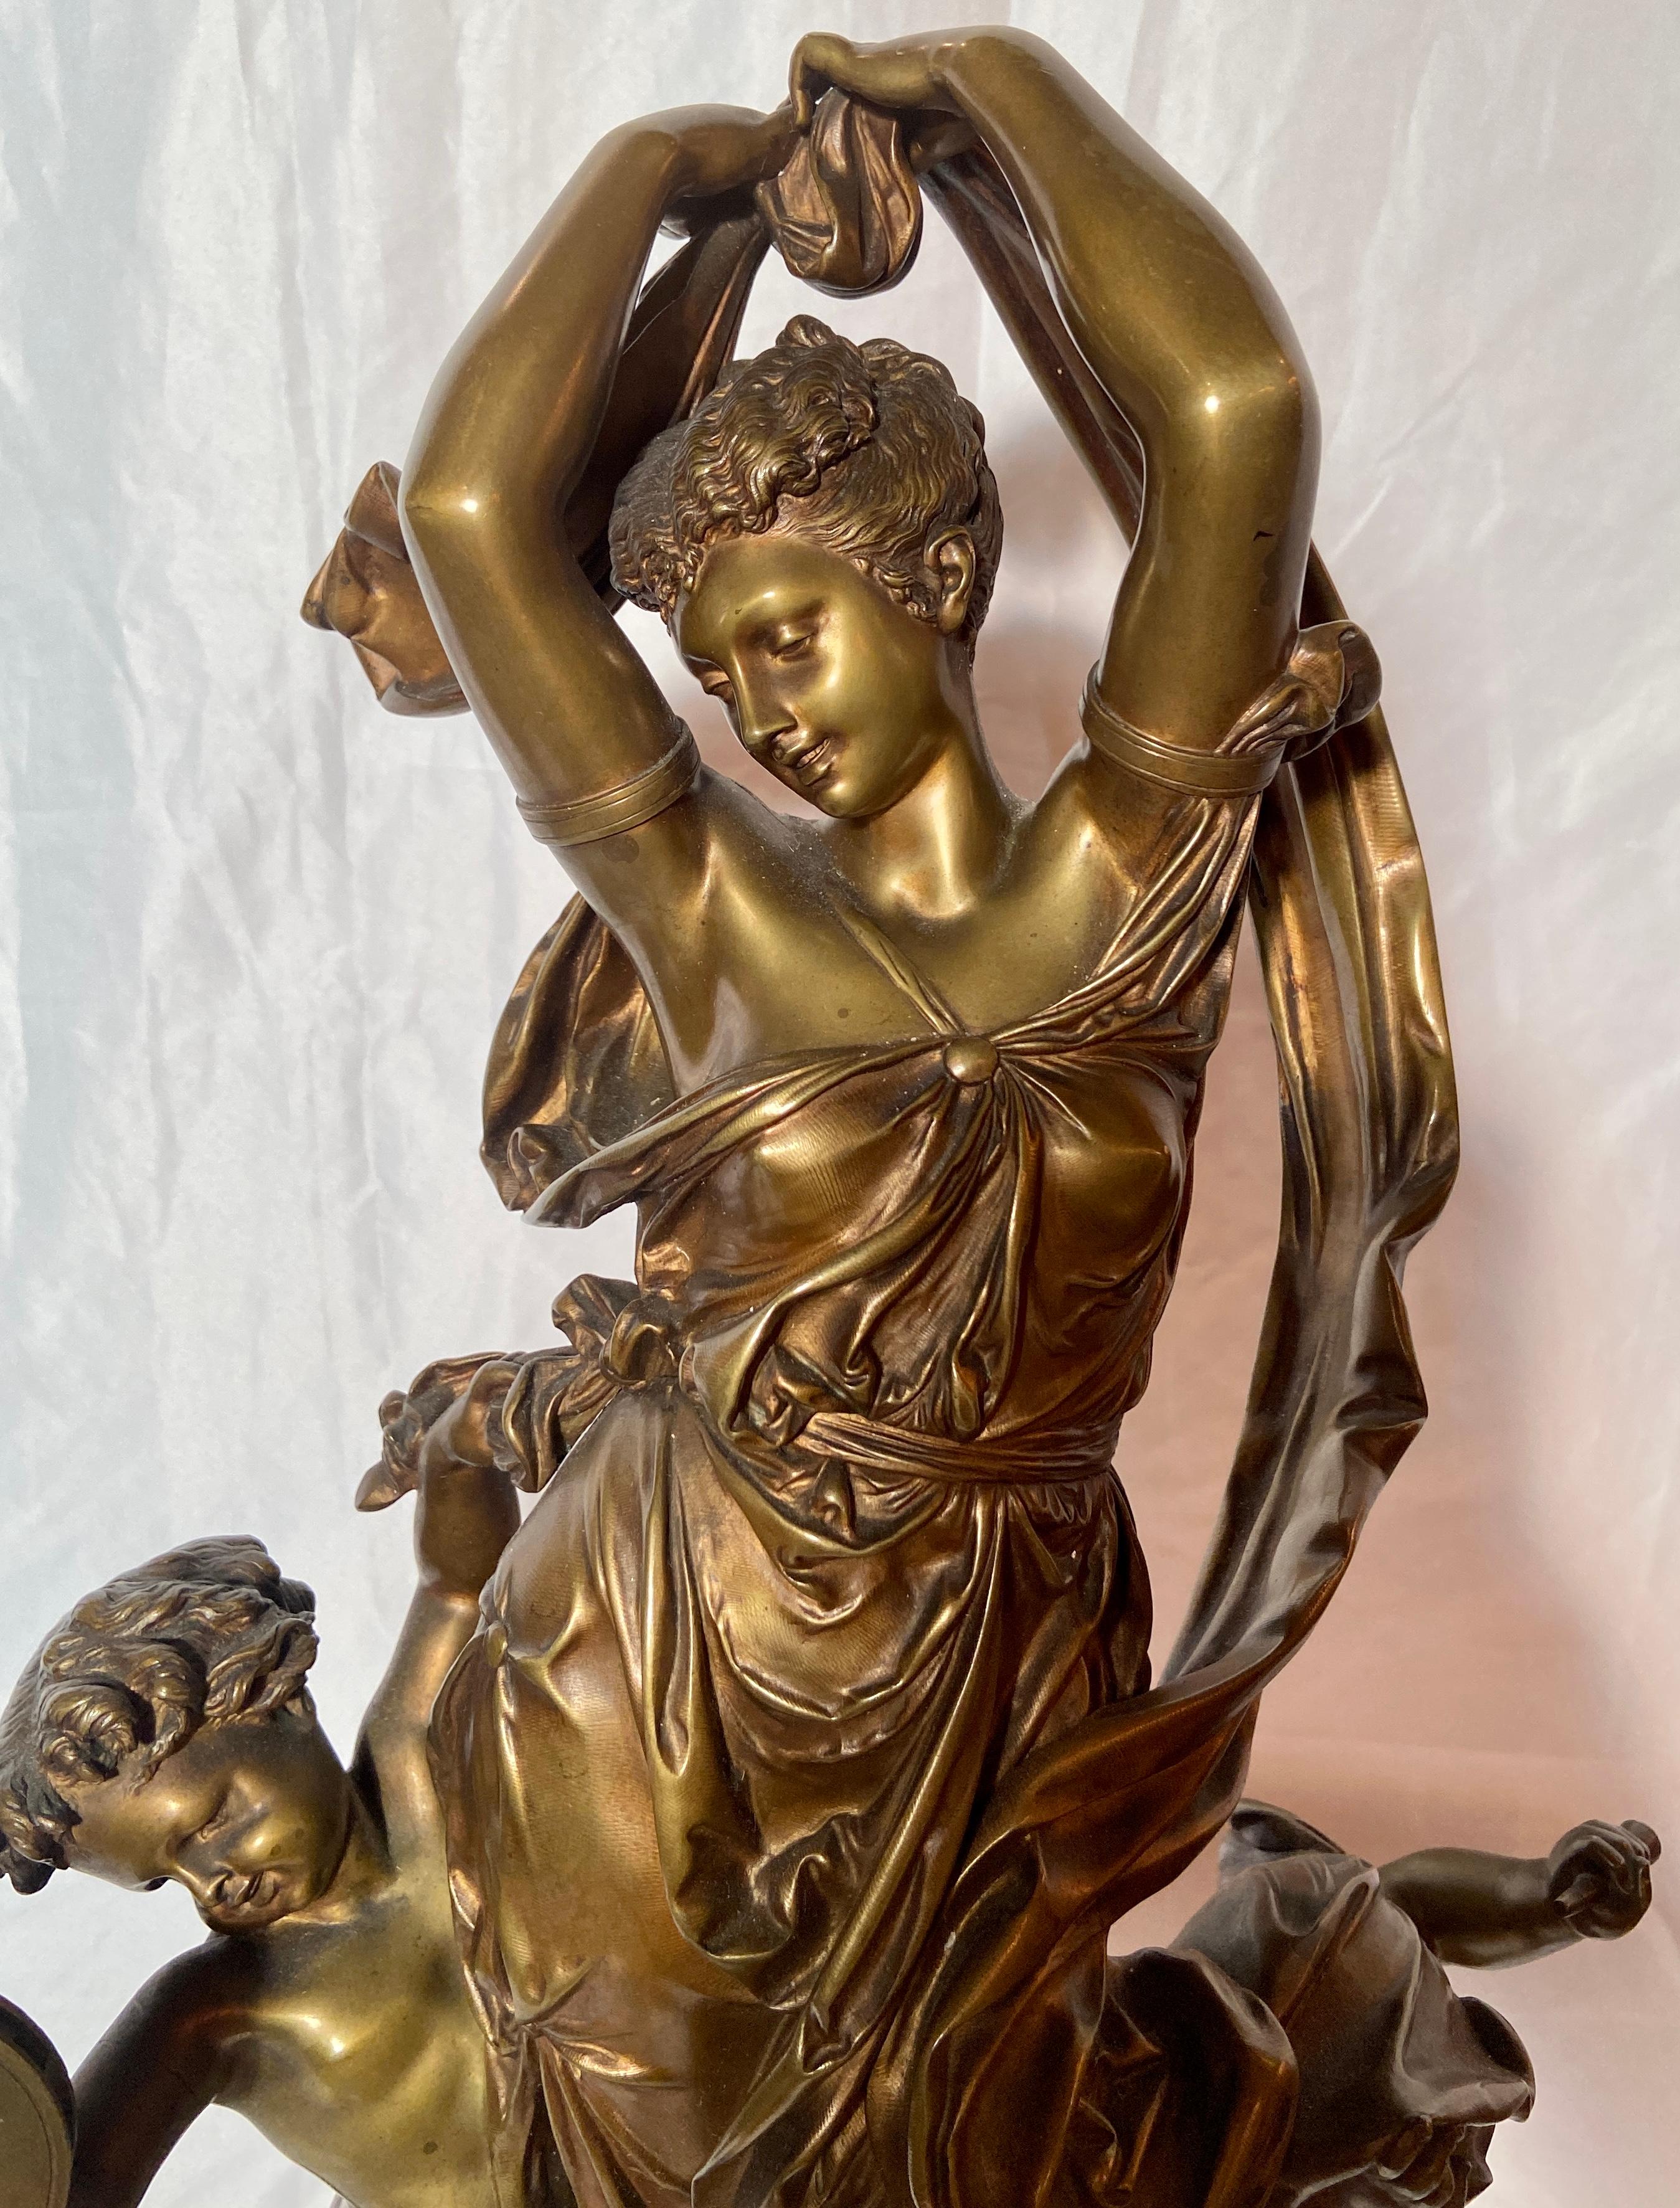 Antique 19th Century French Patinated and Gold Bronze Sculpture, Neoclassical Figures, signed with 